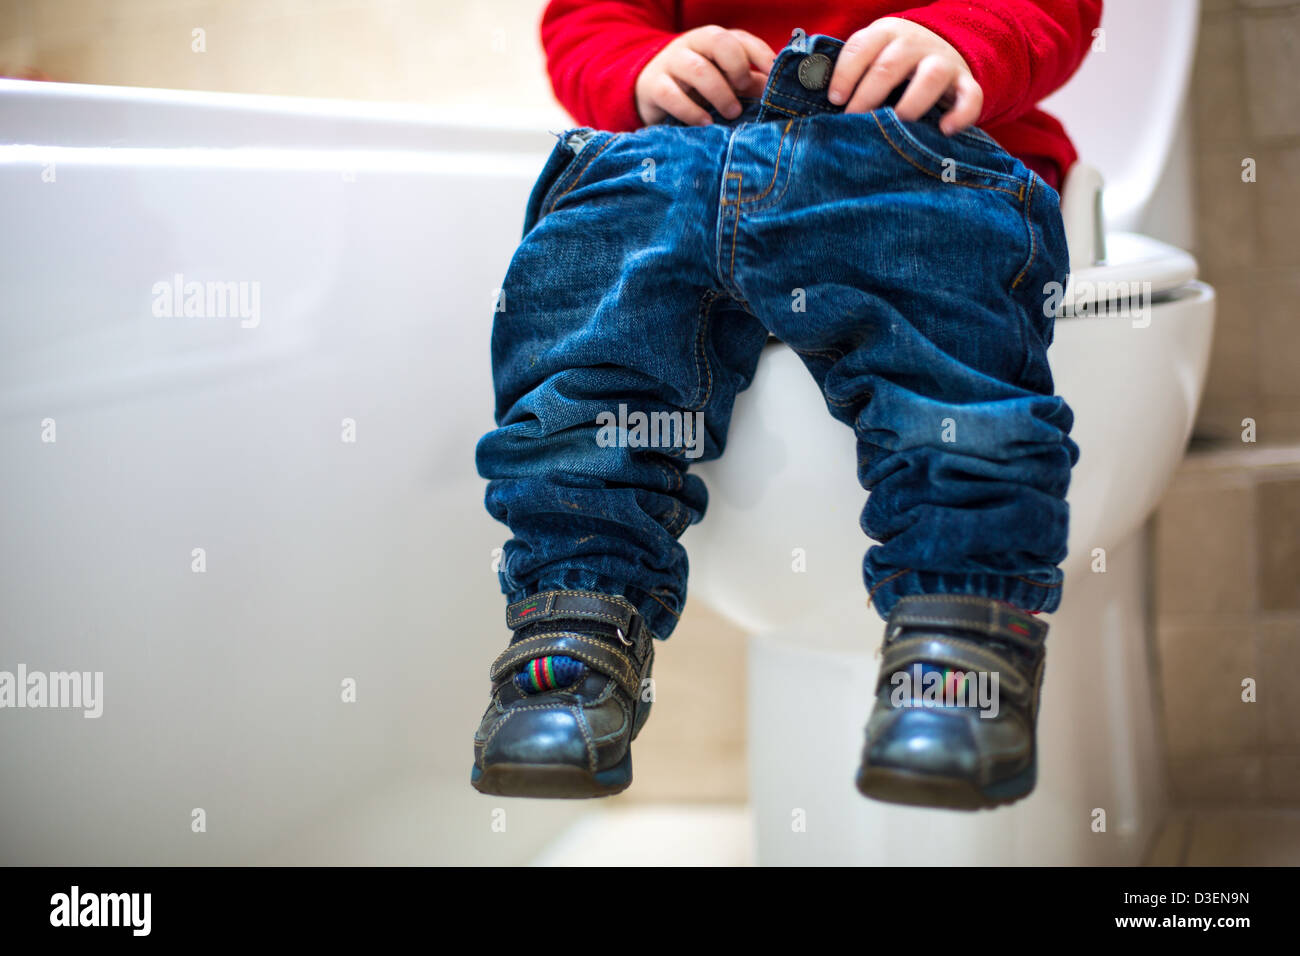 Little Boy learning to Potty Train Stock Photo